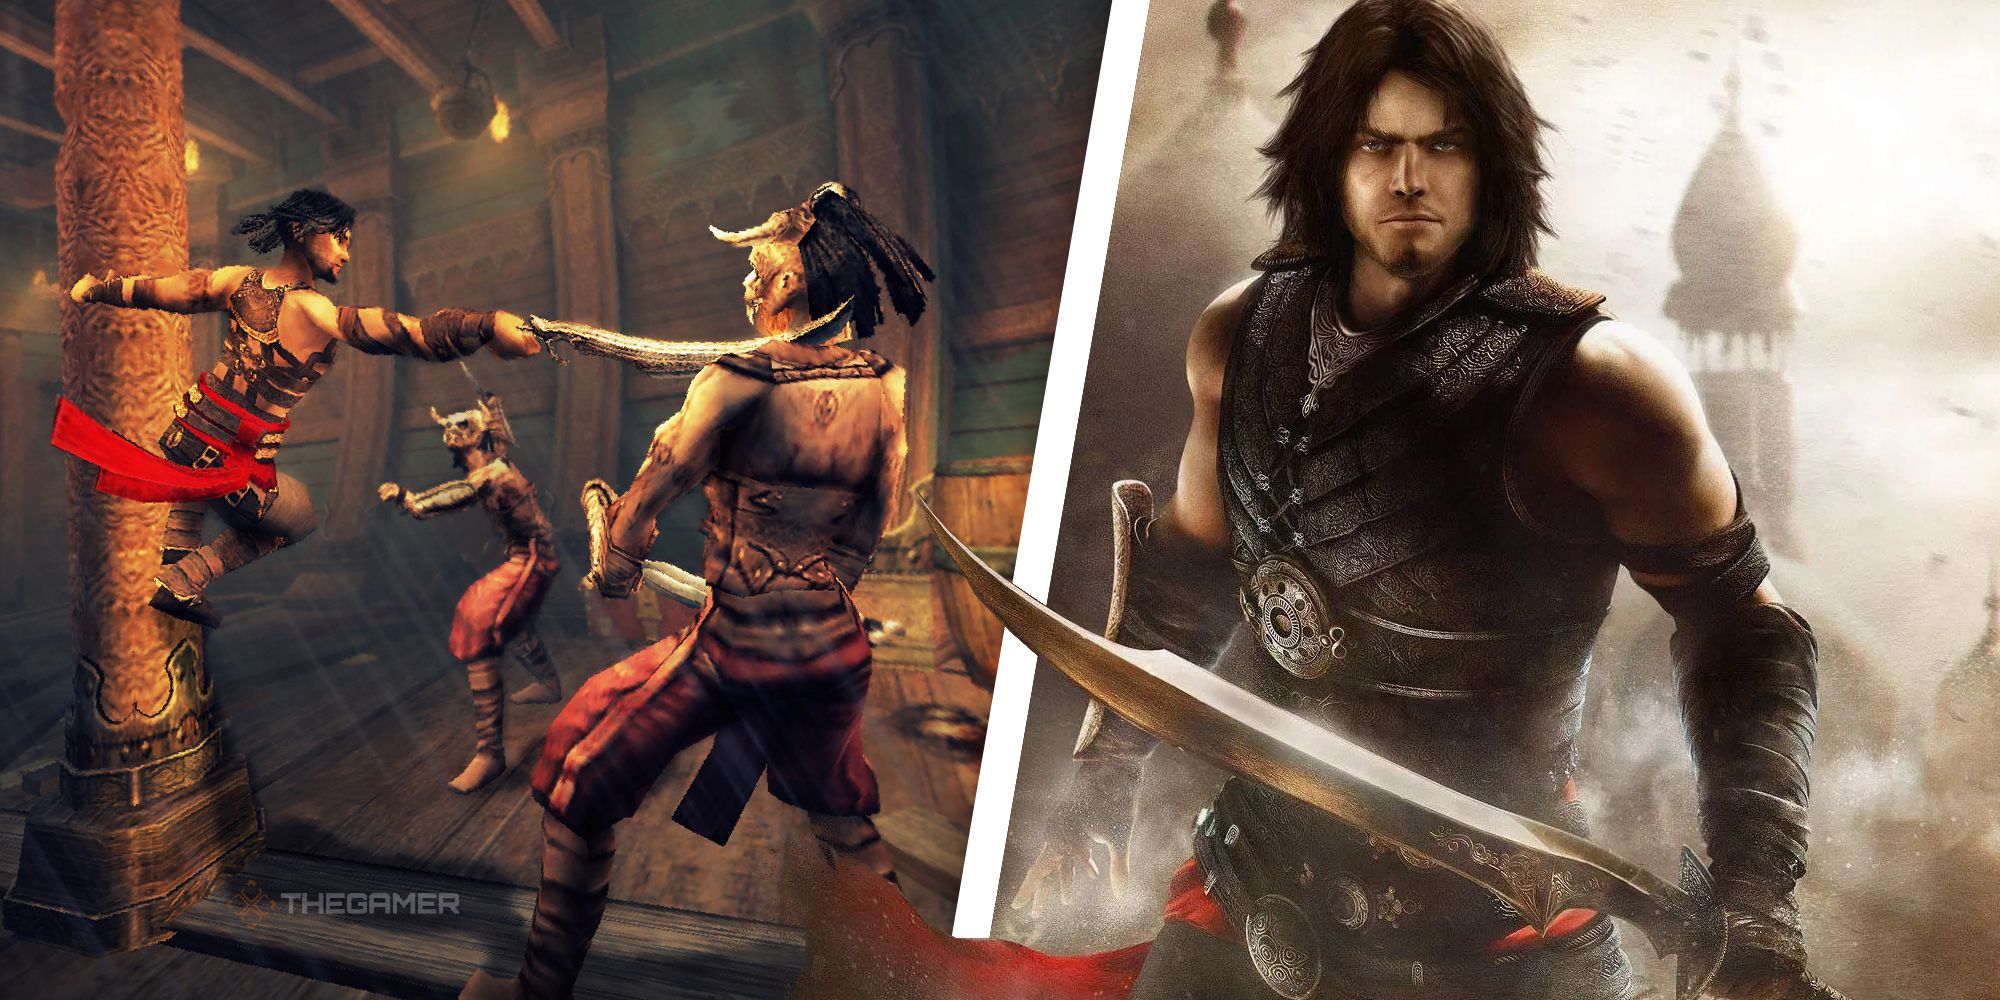 Prince of Persia Games In Chronological Order